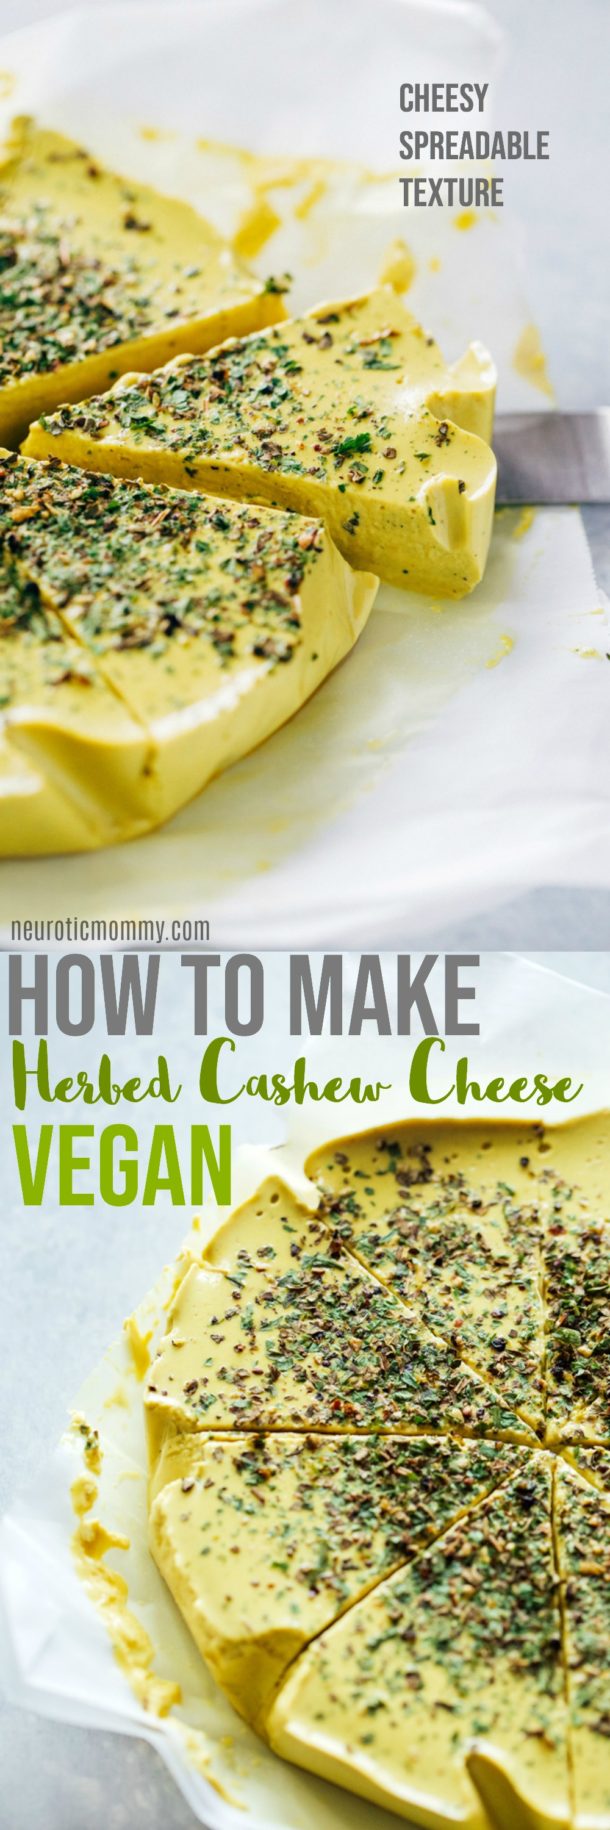 How To Make Herbed Cashew Cheese - NeuroticMommy